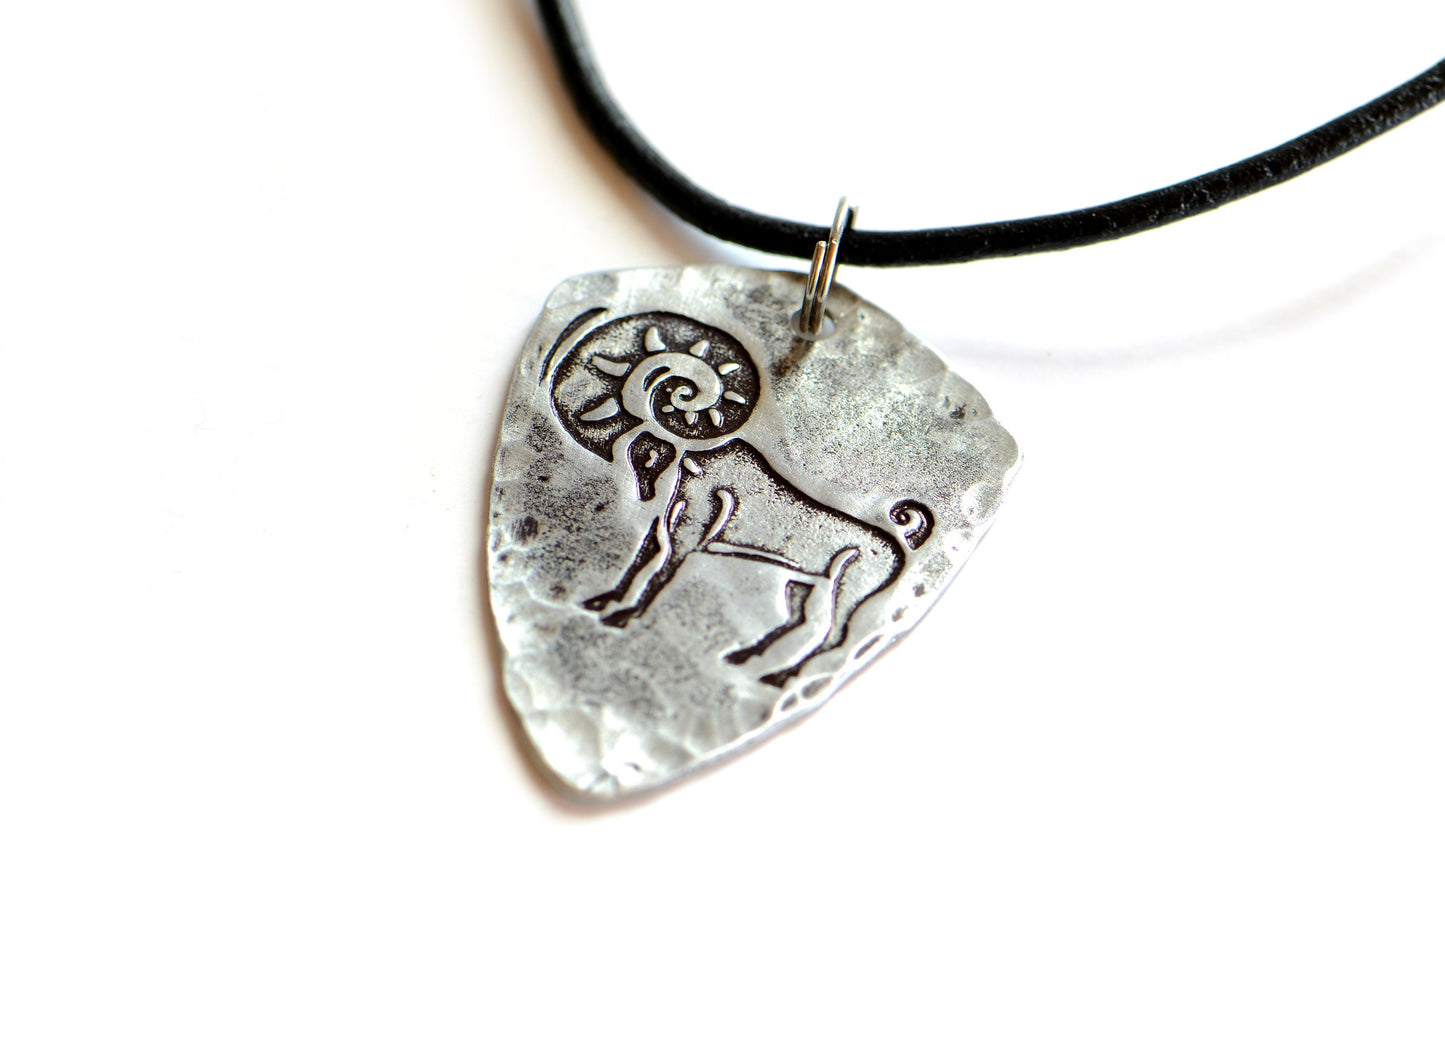 Zodiac sign sterling silver necklace - Aries as shown but can be customized to any astrology signs